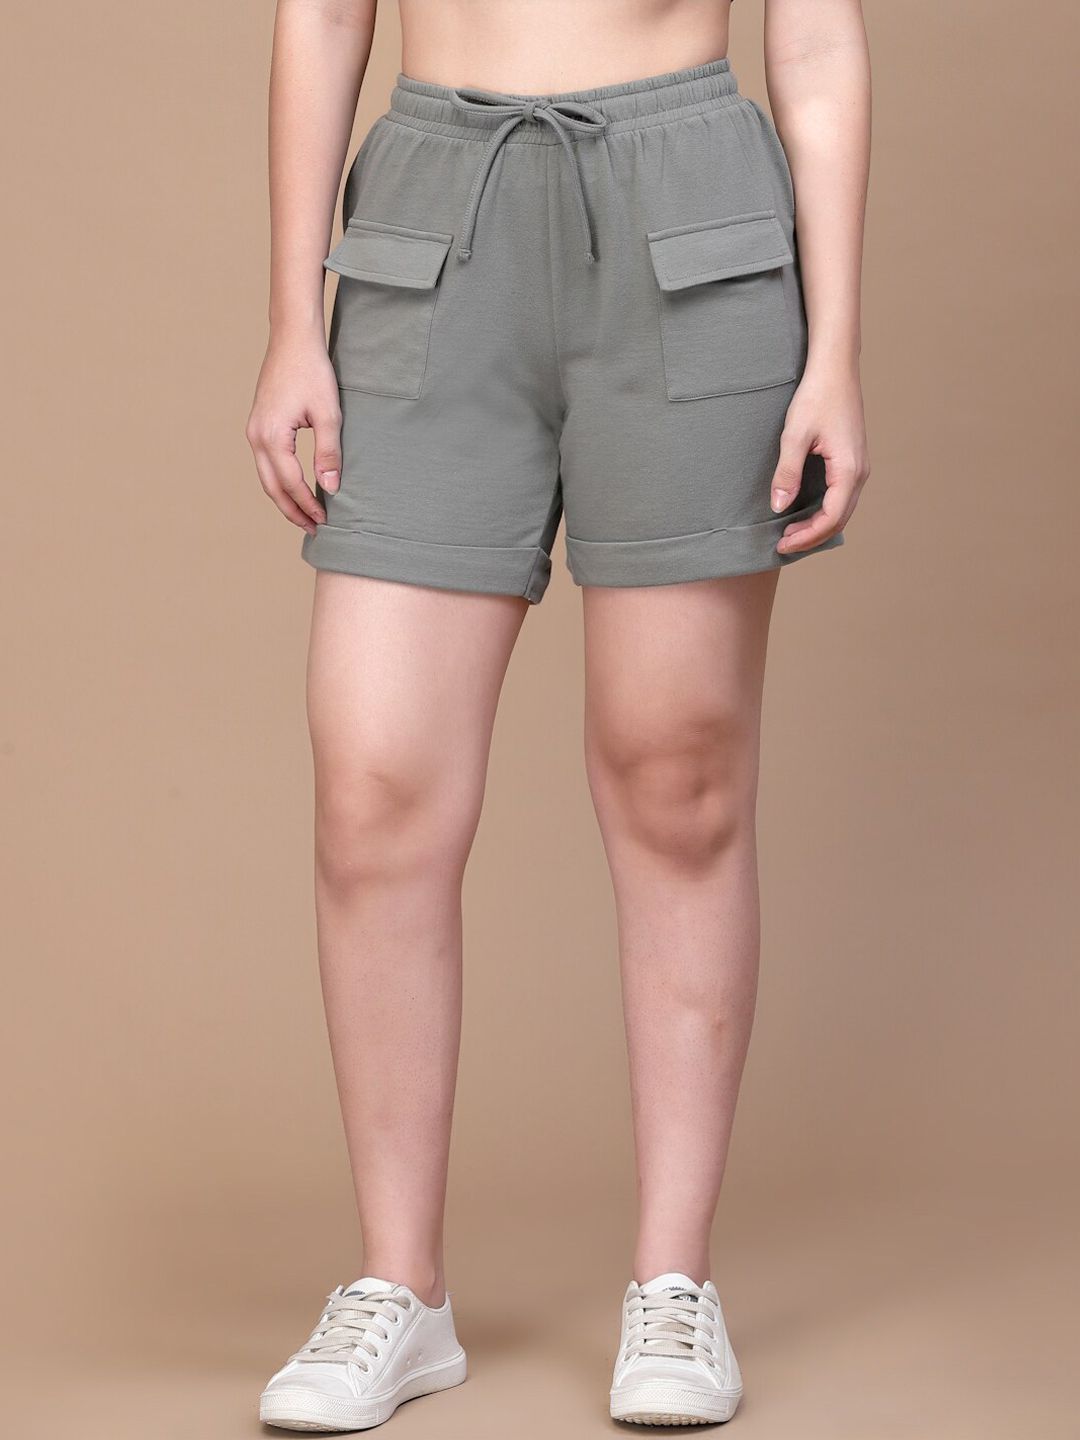 Strong And Brave Women Mid-Rise Cotton Sports Shorts Price in India